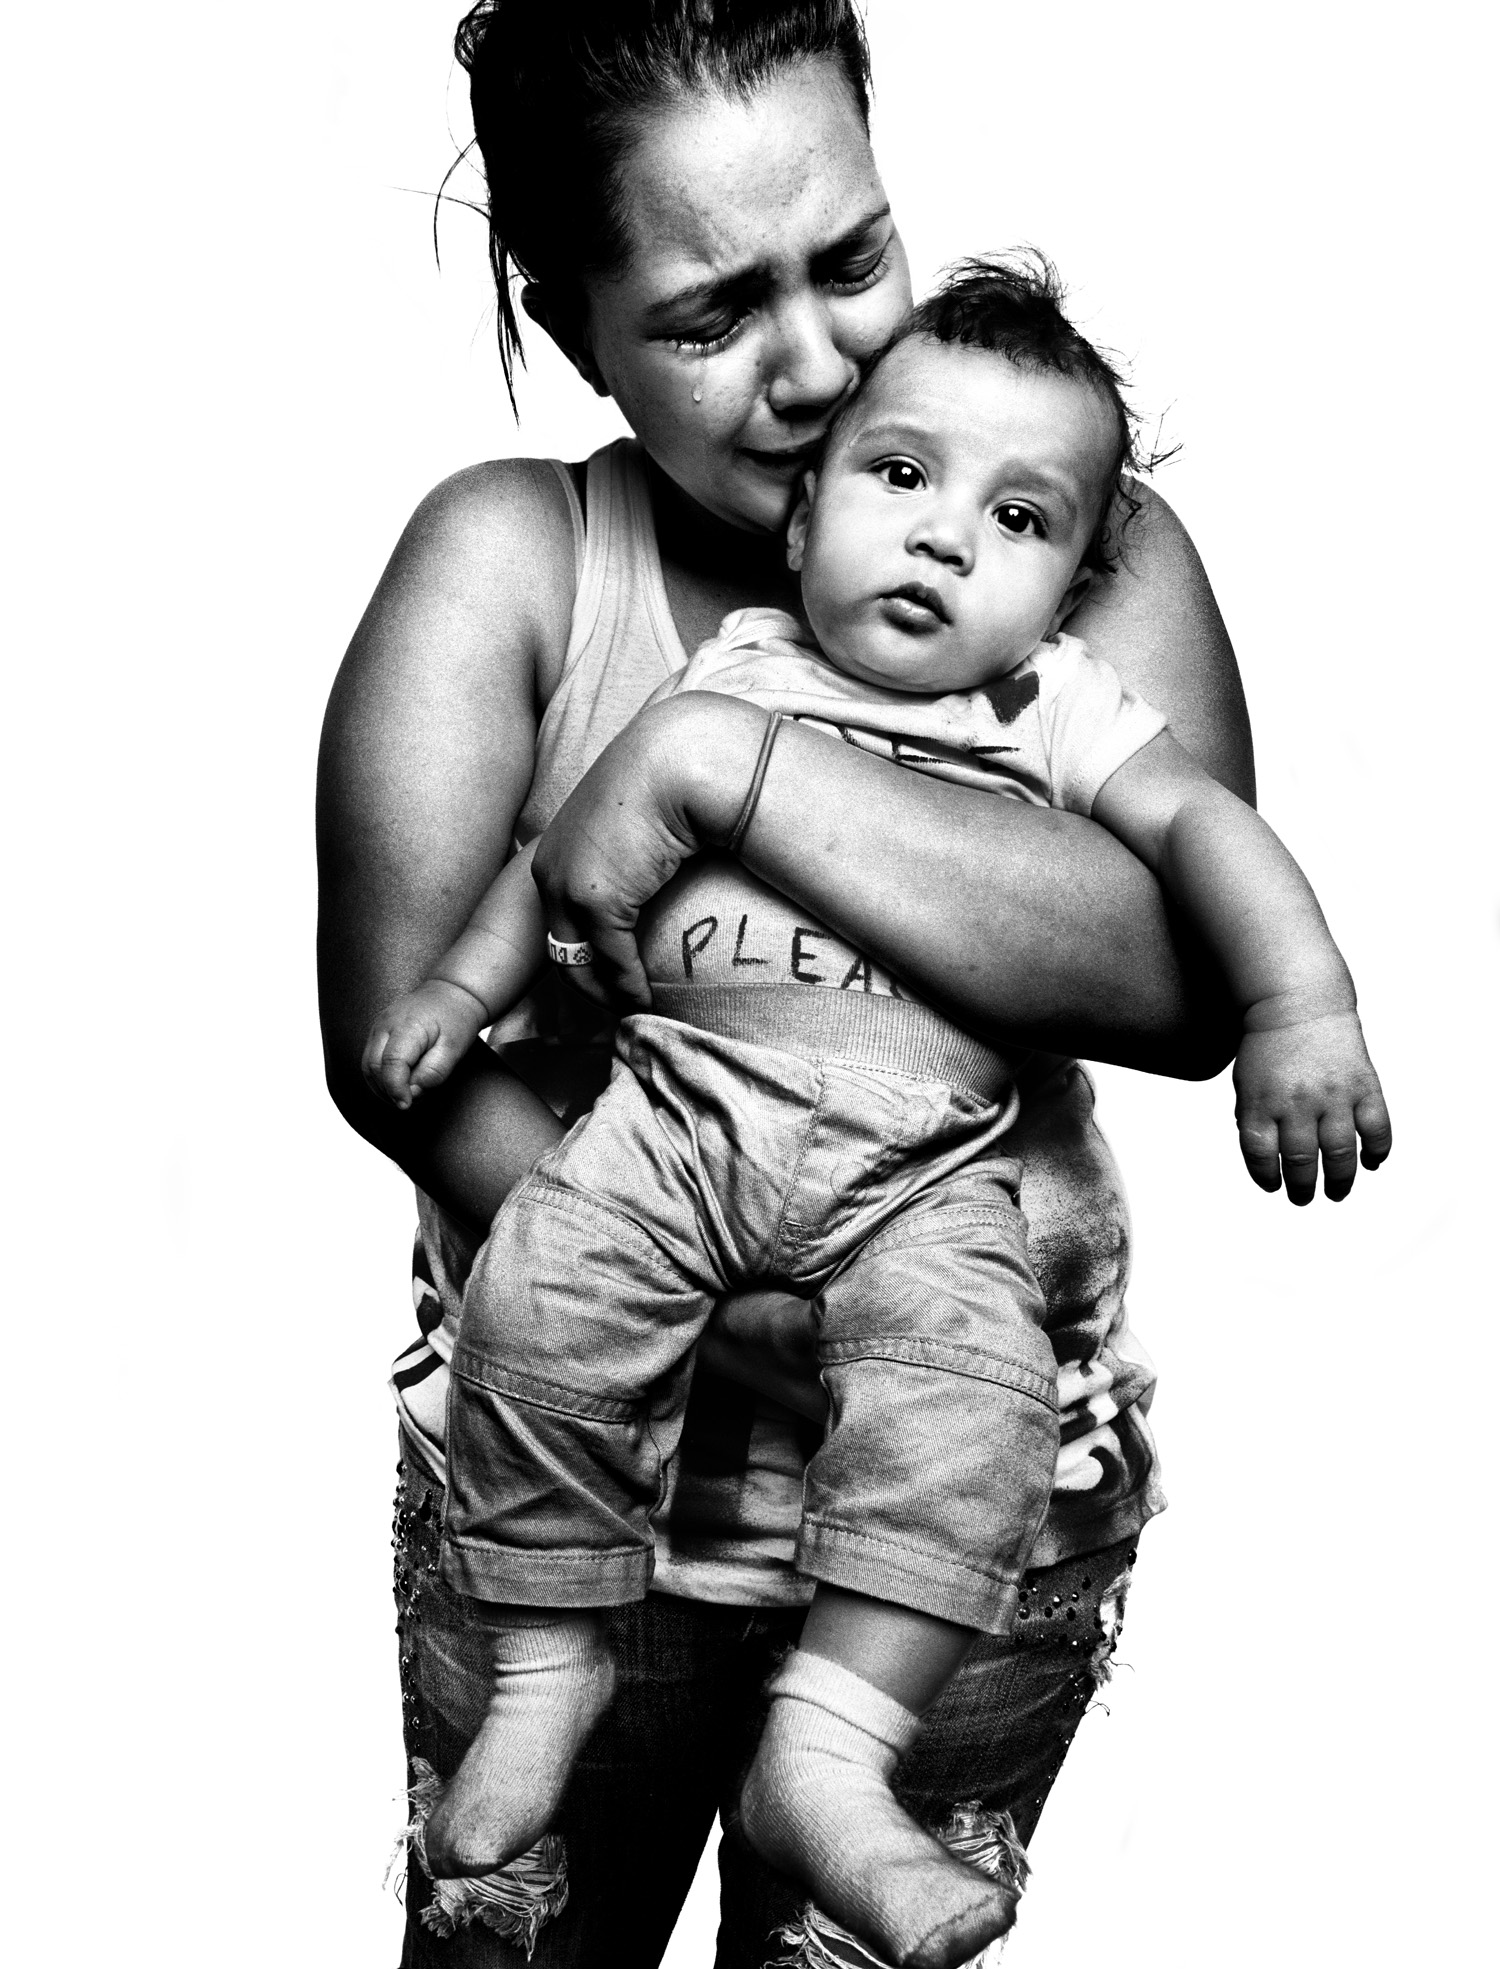 Kathleen Velazquez, 18 | Phoenix | July 29, 2013
                              
                              Velazquez says her partner was arrested last year in Maricopa County, Ariz., for working with false documents. She says he spent more than 10 months in immigration detention and missed the birth of his son Aaron, pictured.